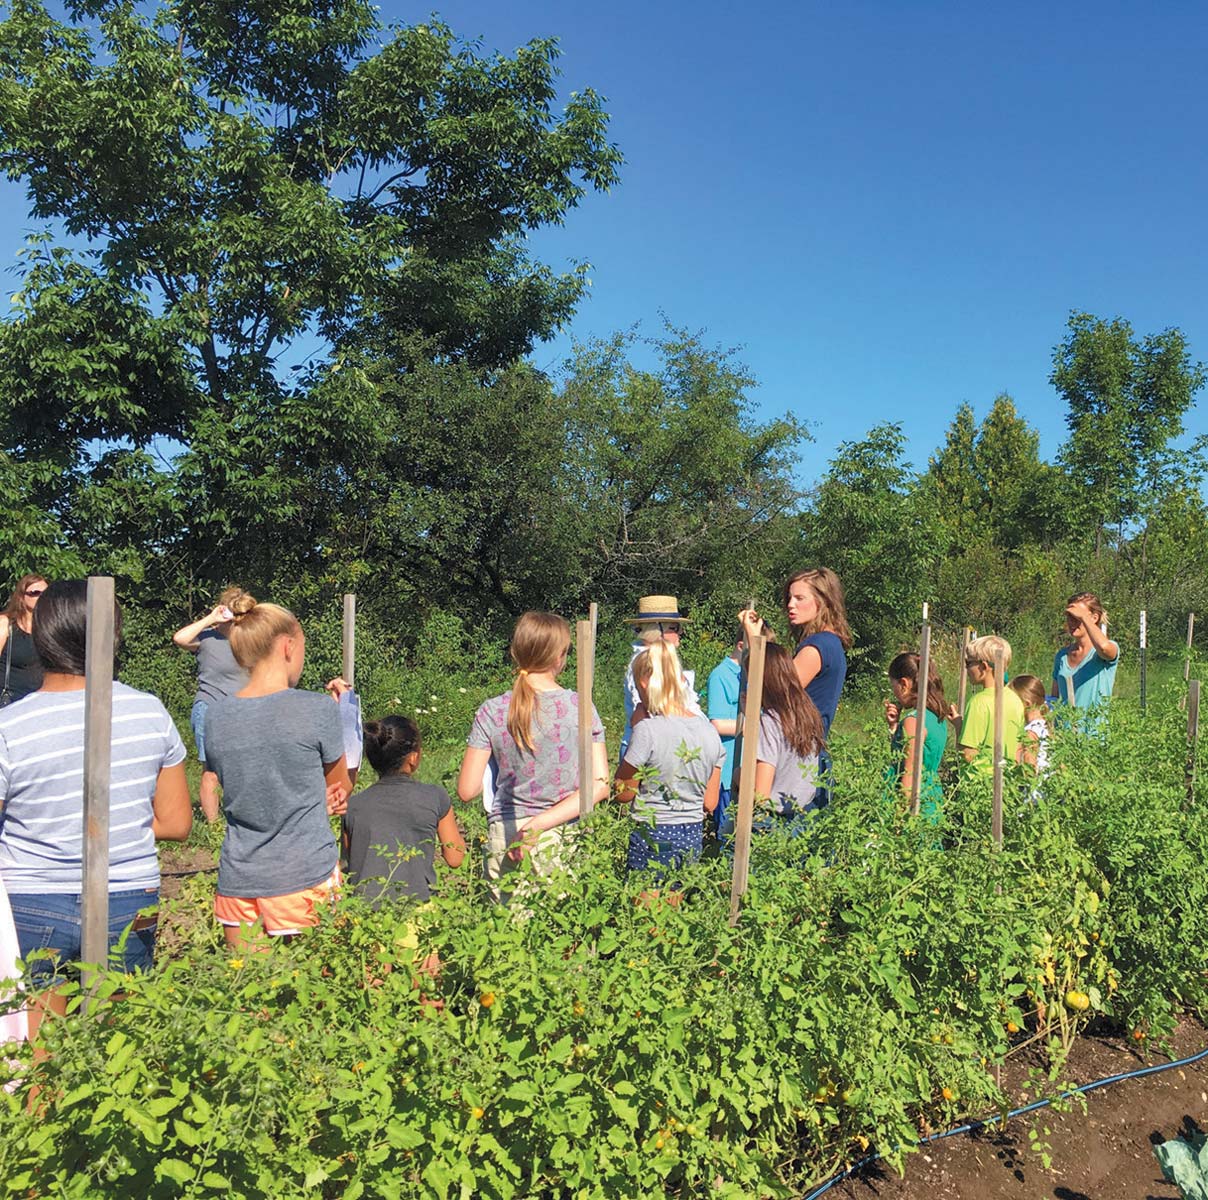 Kids cooking school experience includes farm and gardens